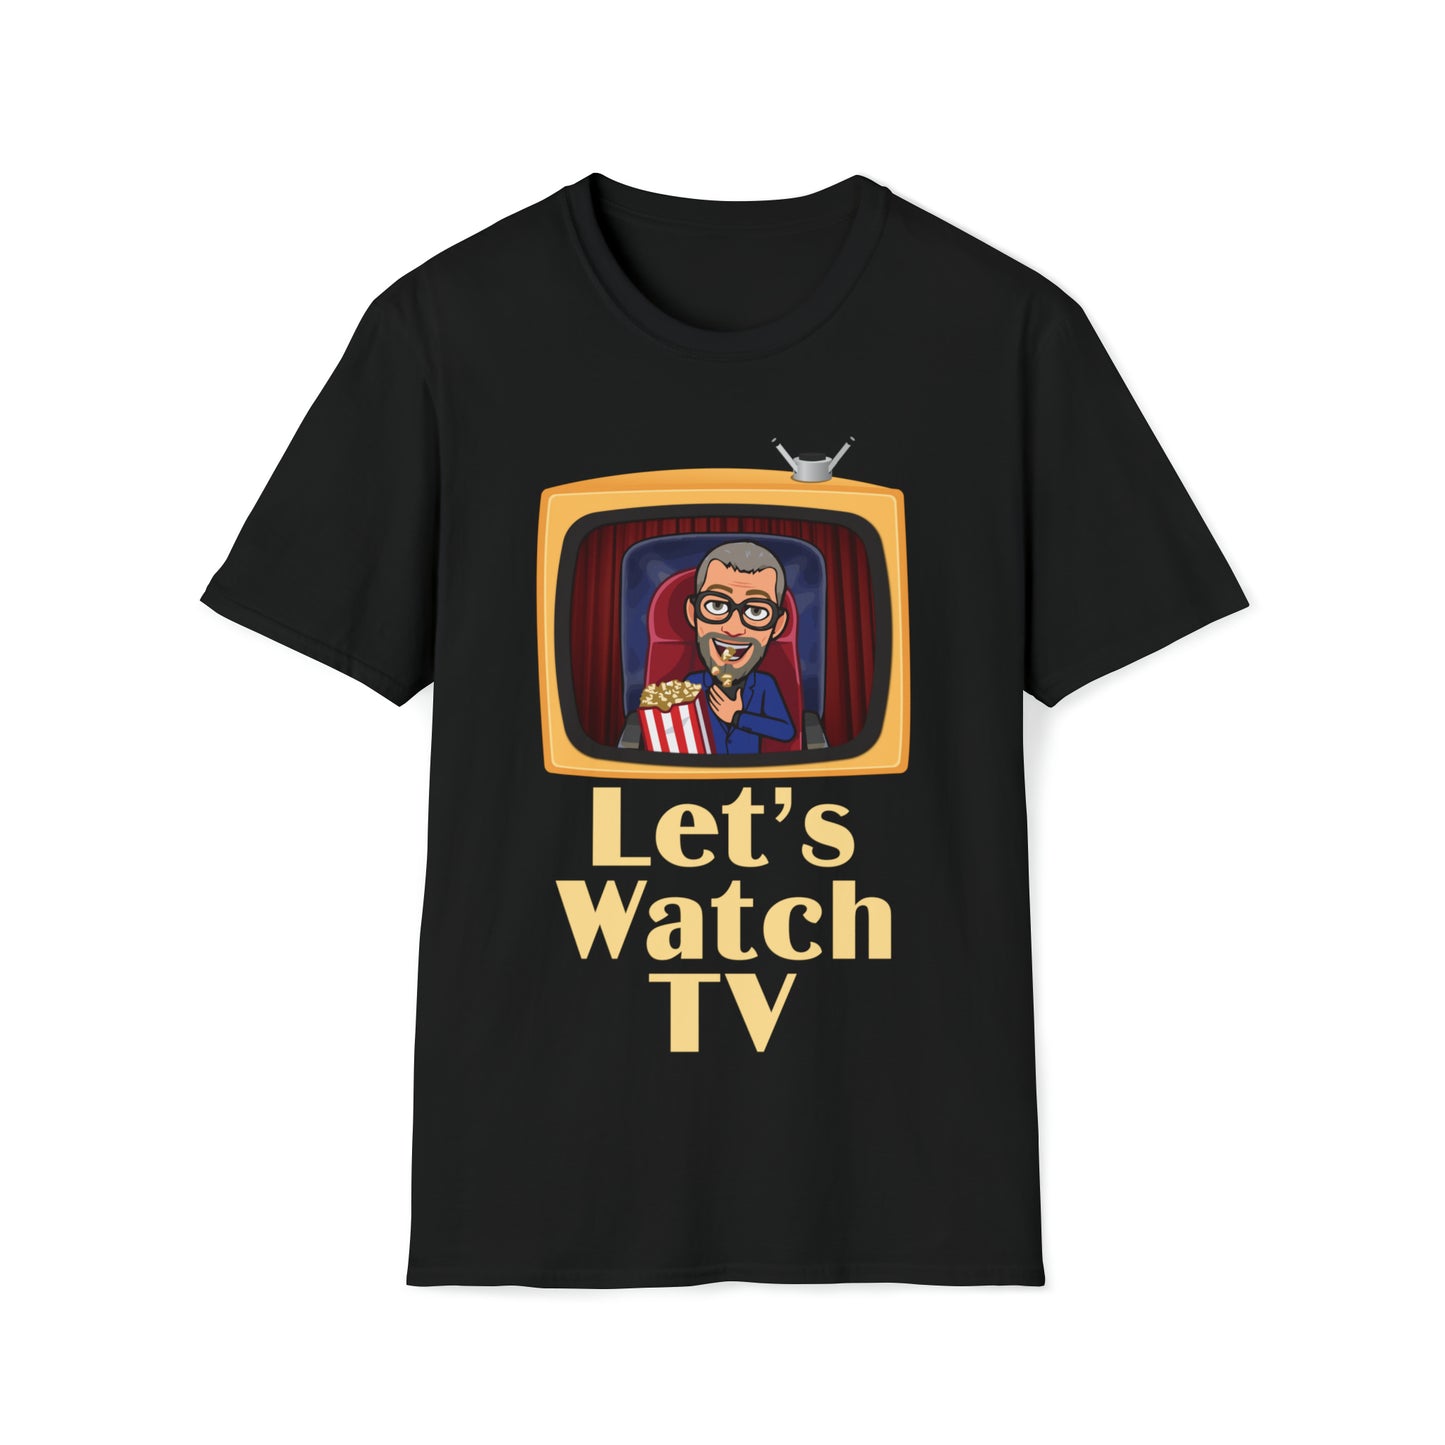 Jay Watch Let's Watch TV - Unisex Softstyle T-Shirt